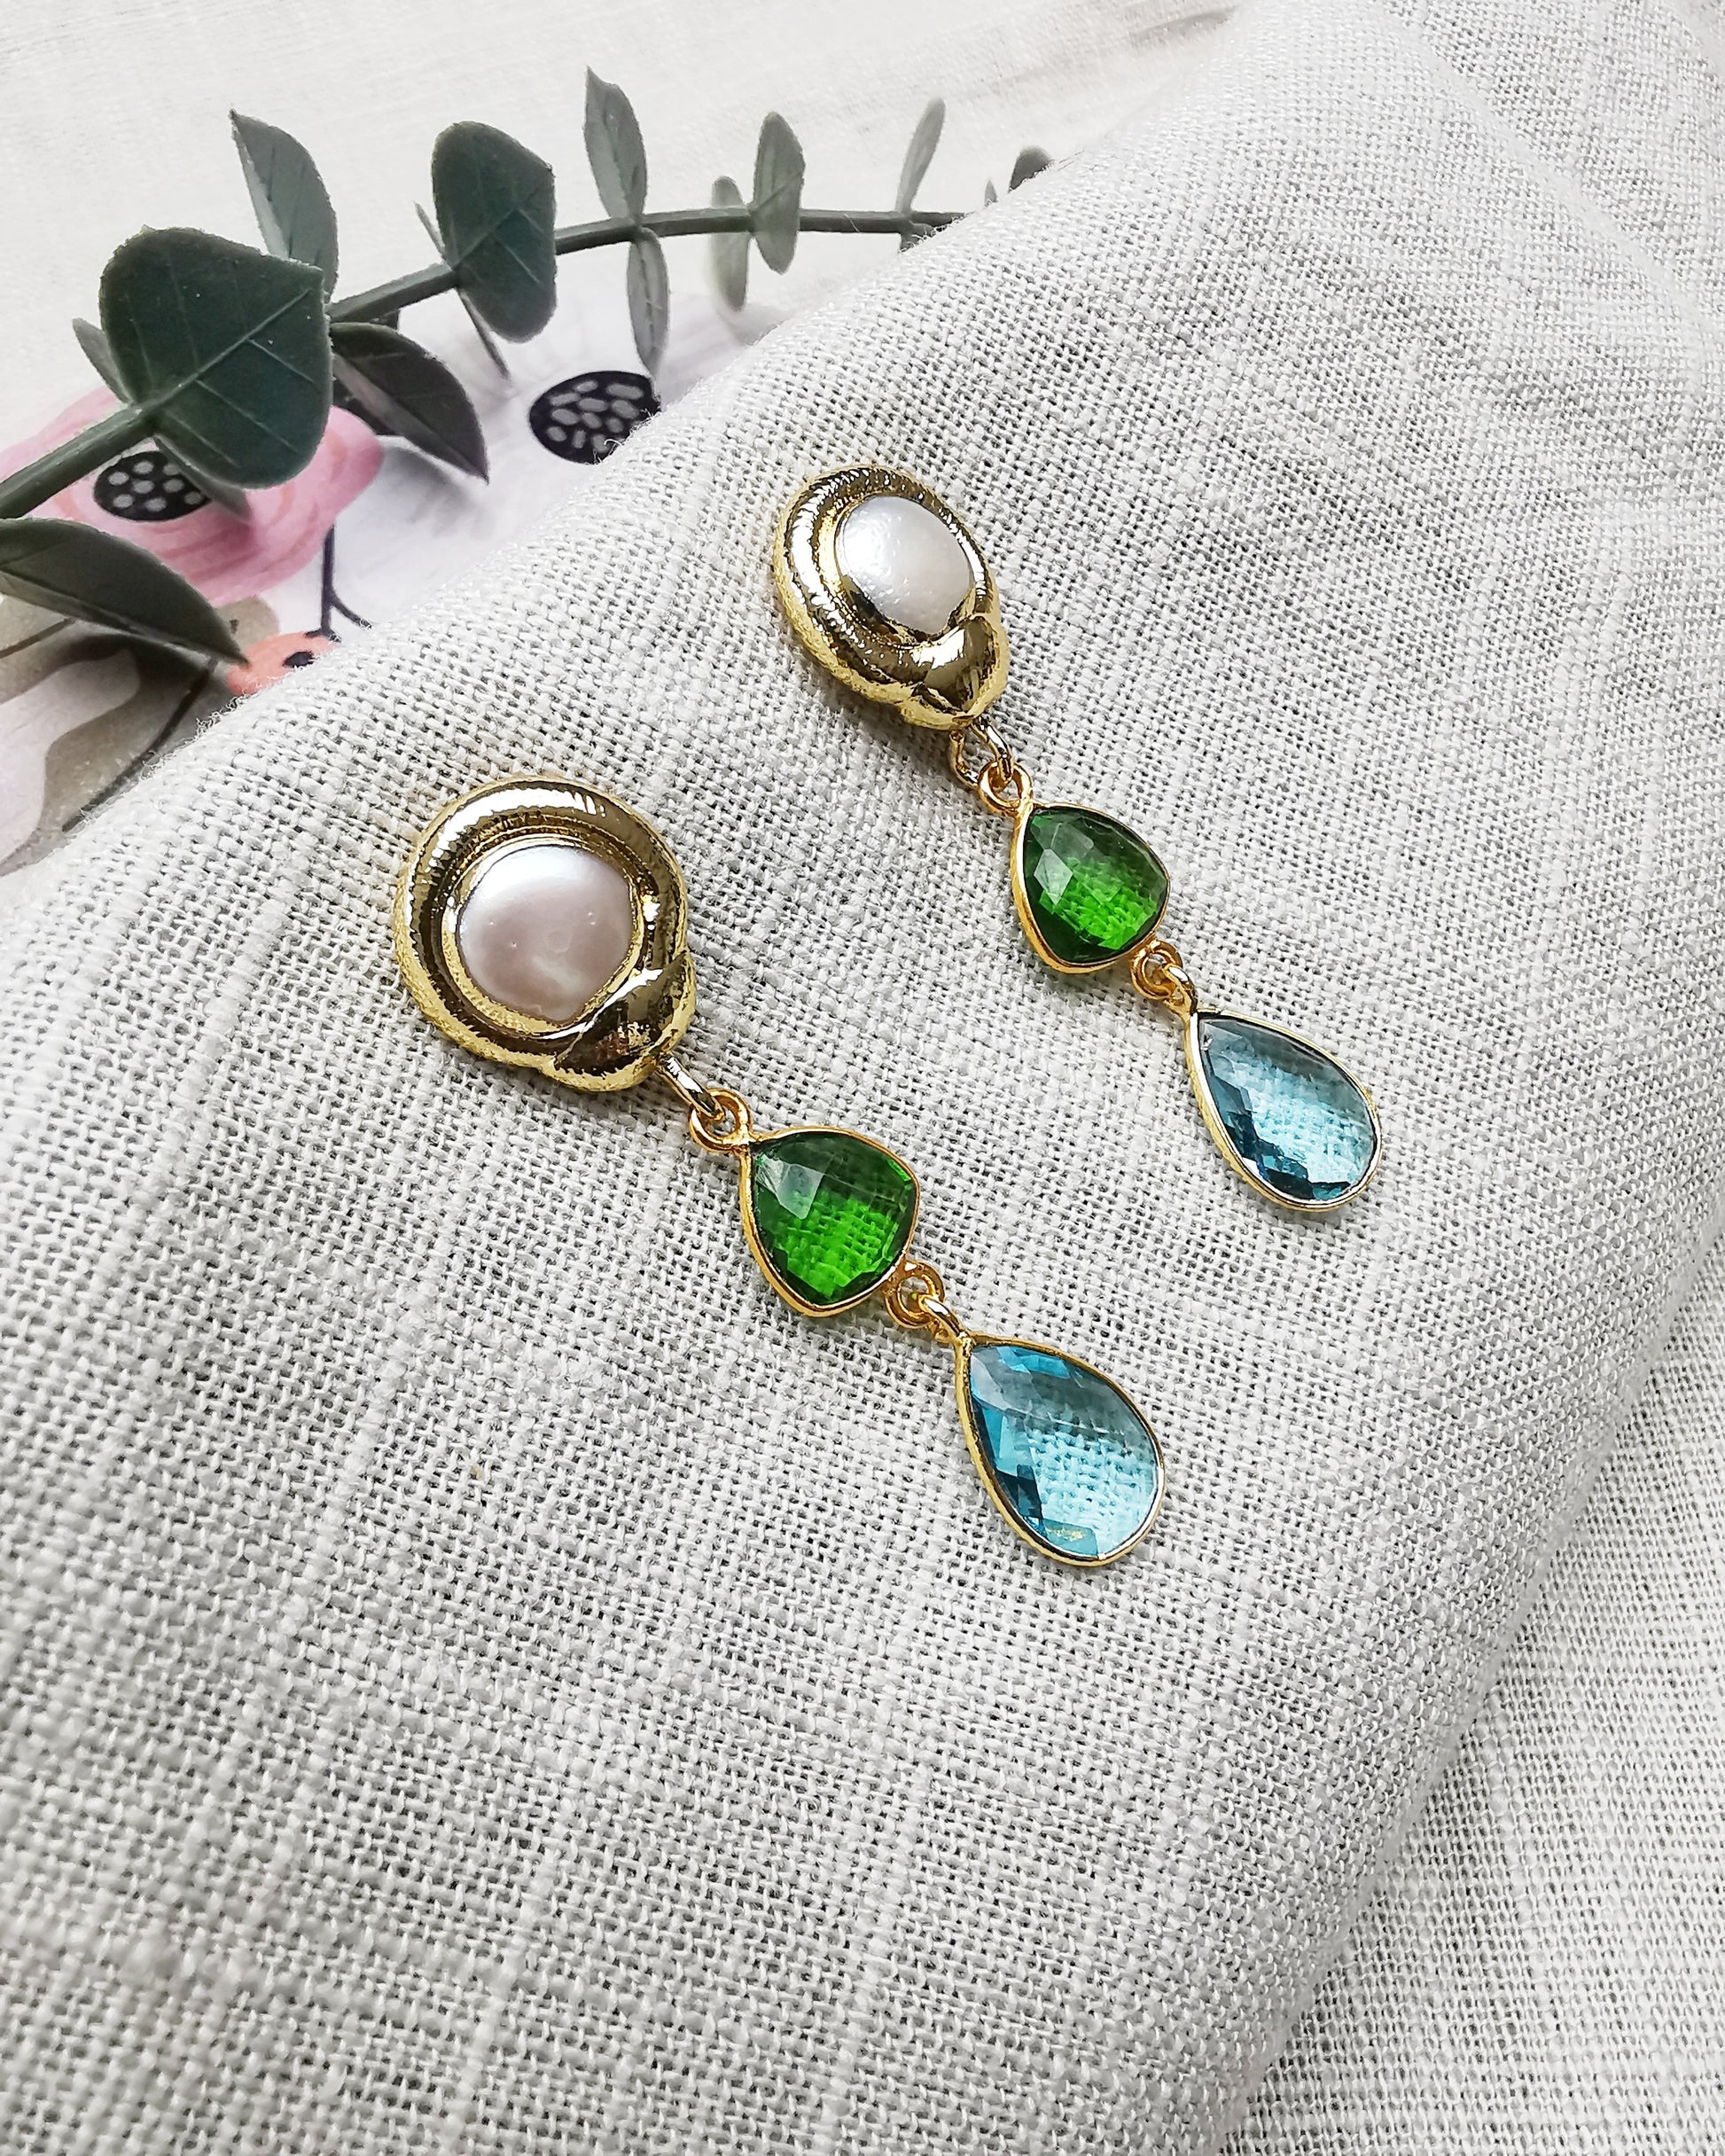 Freshwater Pearl Stud Earrings with Peridot and Blue Topaz - Vinta Shop